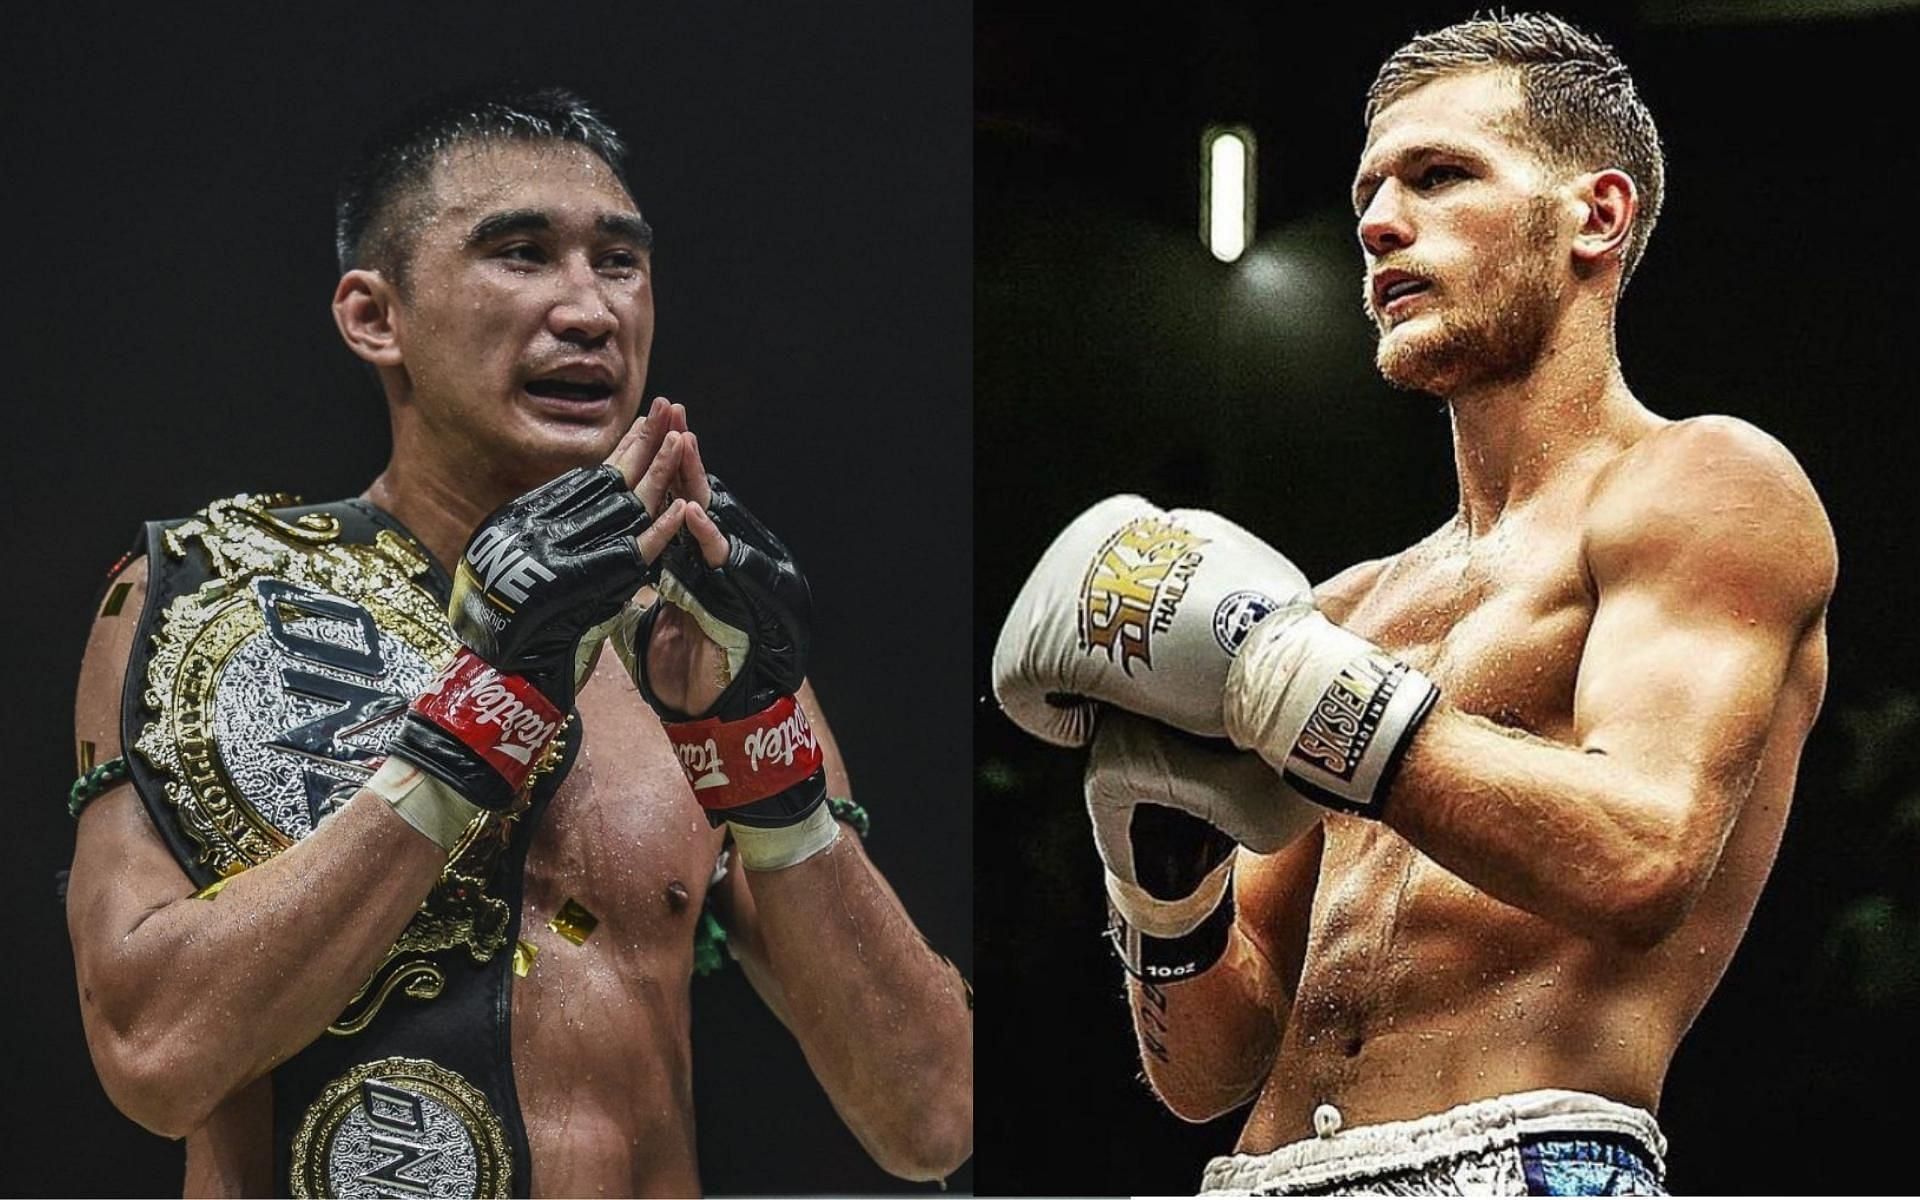 ONE featherweight Muay Thai champ Petchmorakot Petchyindee (left) will face Jimmy Vienot (right) for the belt at ONE 157. (Images courtesy of ONE Championship)